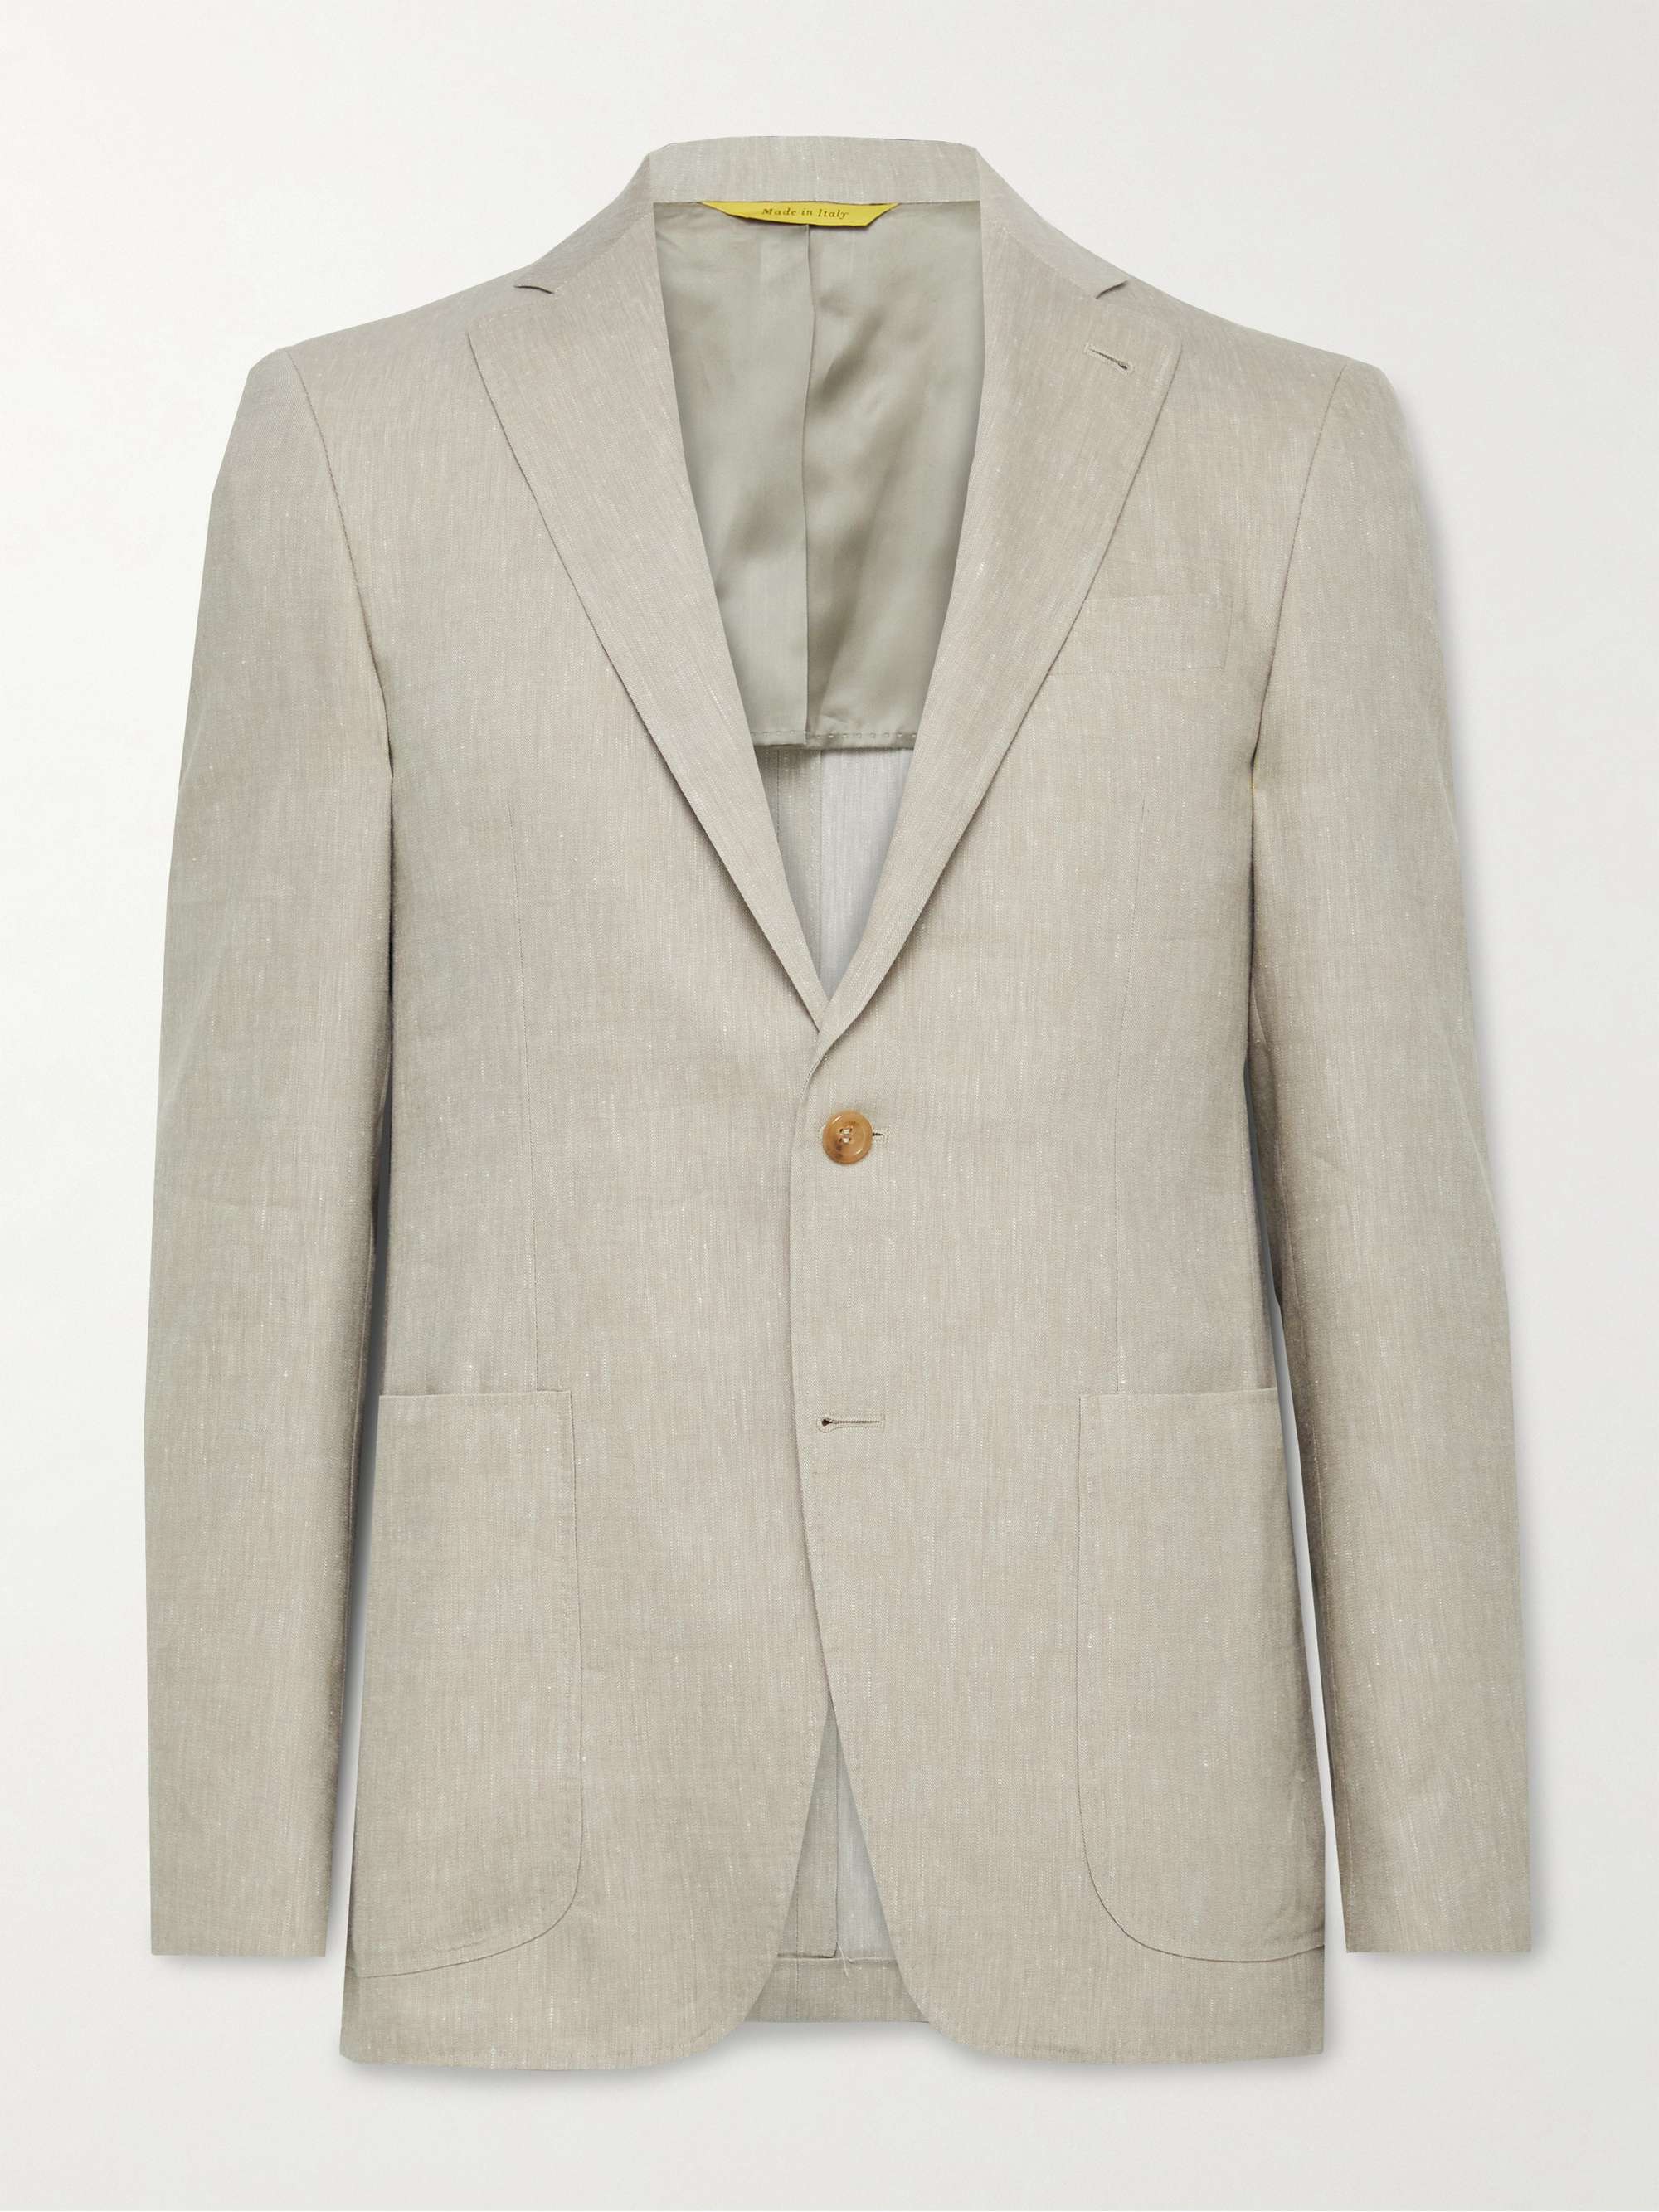 CANALI Kei Slim-Fit Linen and Wool-Blend Suit Jacket